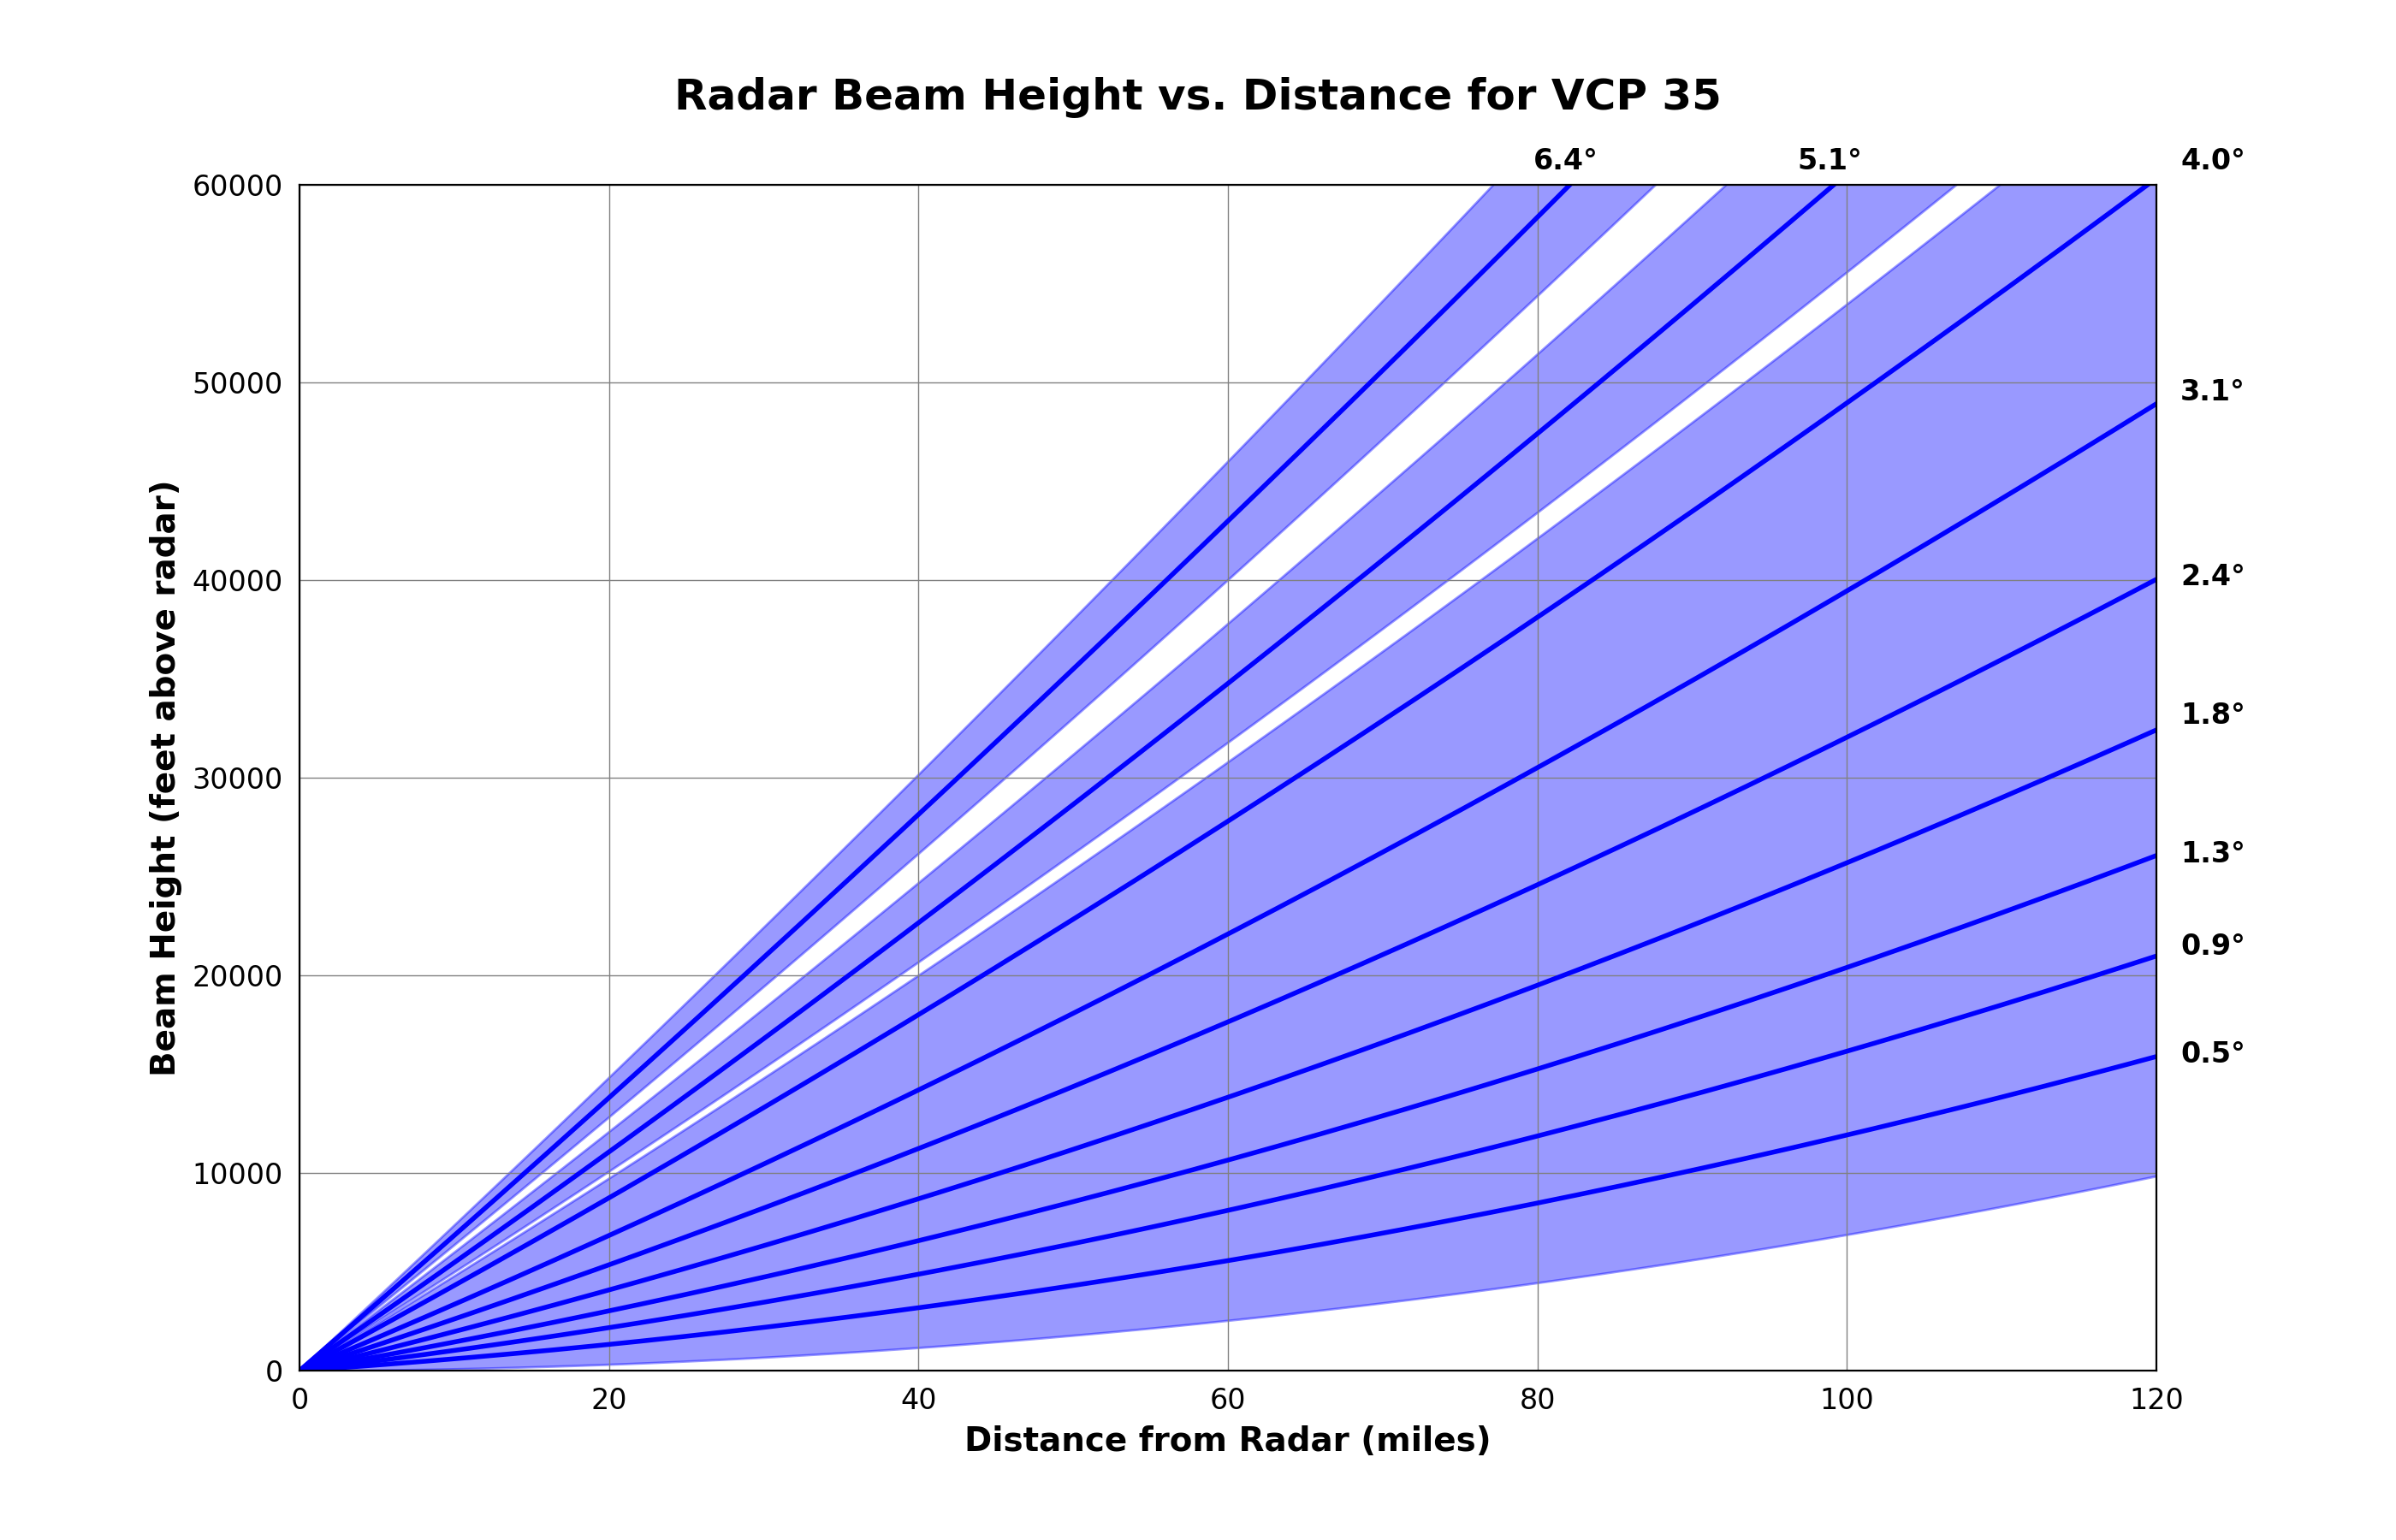 VCP 35 beam coverage. 9 elevation angles are scanned in around 7 minutes.